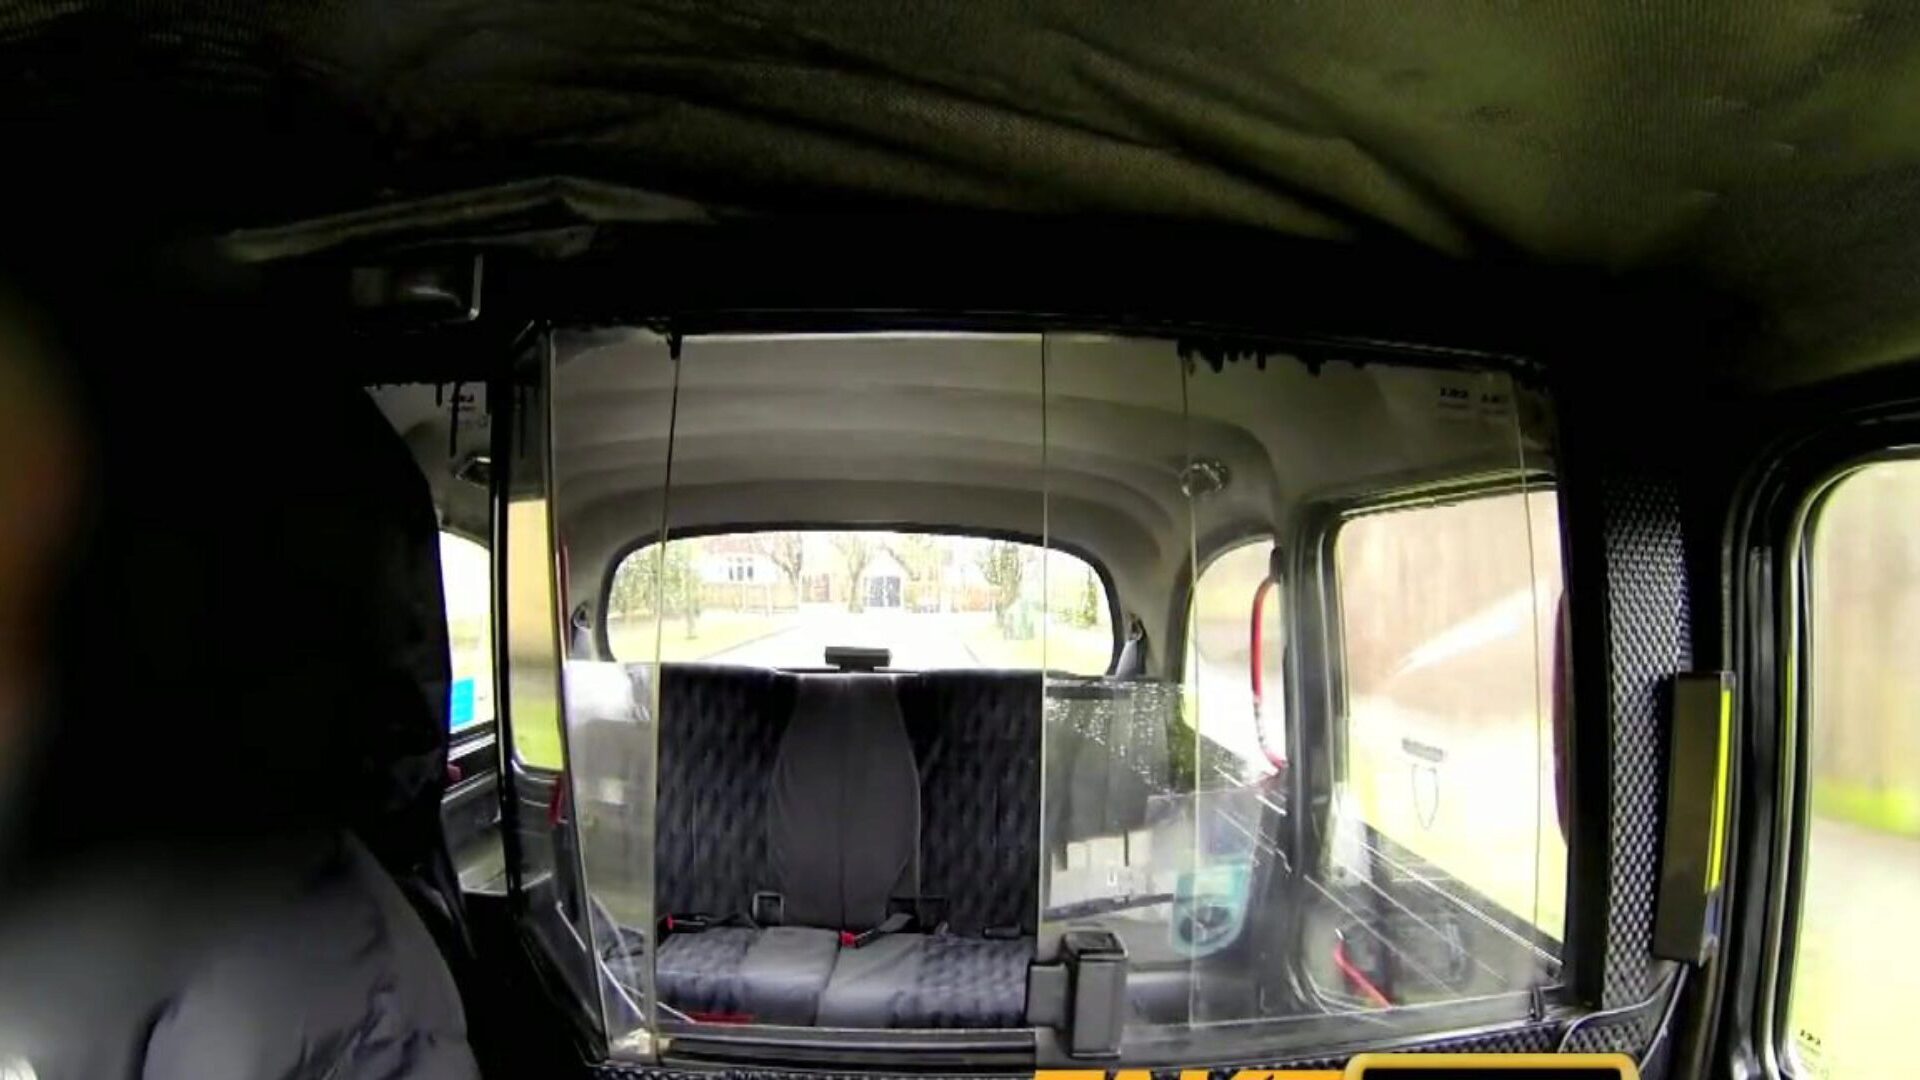 Faketaxi Sex Starved Career Woman in Lunch Break Sex Tape - Free Porn Videos - YouPorn Watch FakeTaxi Sex starved career lady in lunch break sex tape online on YouPorn.com. YouPorn is the largest Amateur porno video web resource with the greatest selection of free-for-all high quality reality movies Enjoy our HD porn videos on any instrument of your choosing!